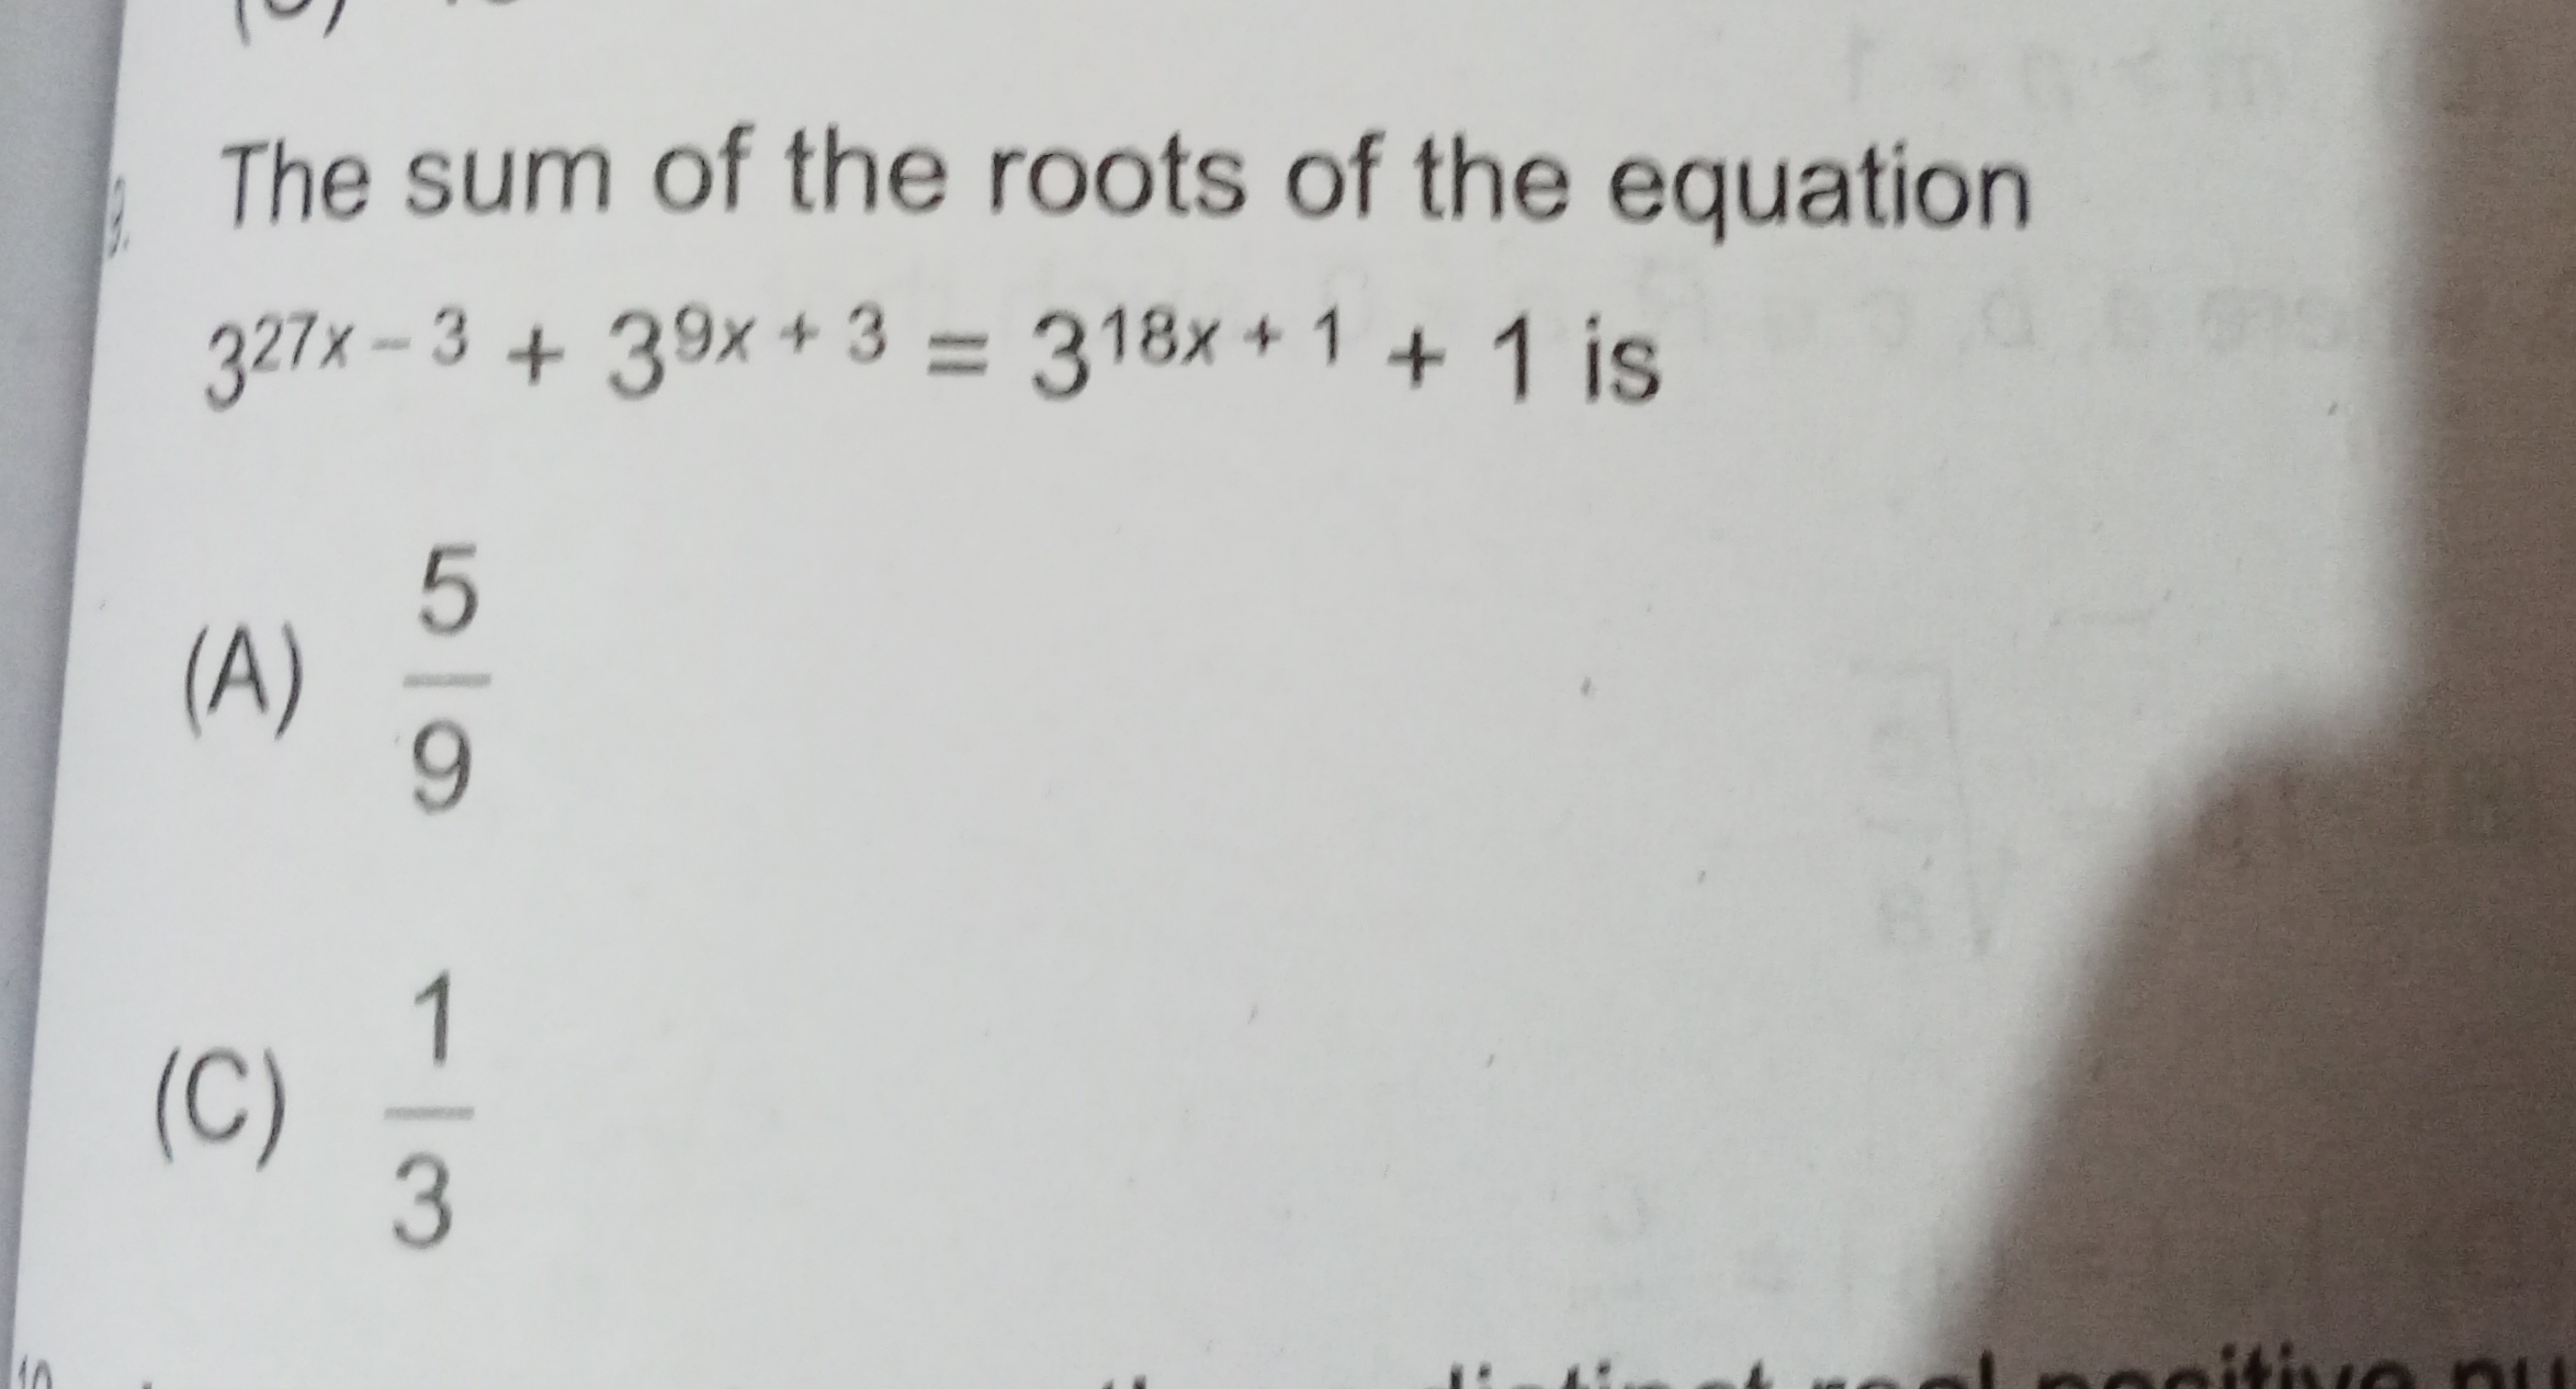 The sum of the roots of the equation 327x−3+39x+3=318x+1+1 is
(A) 95​
